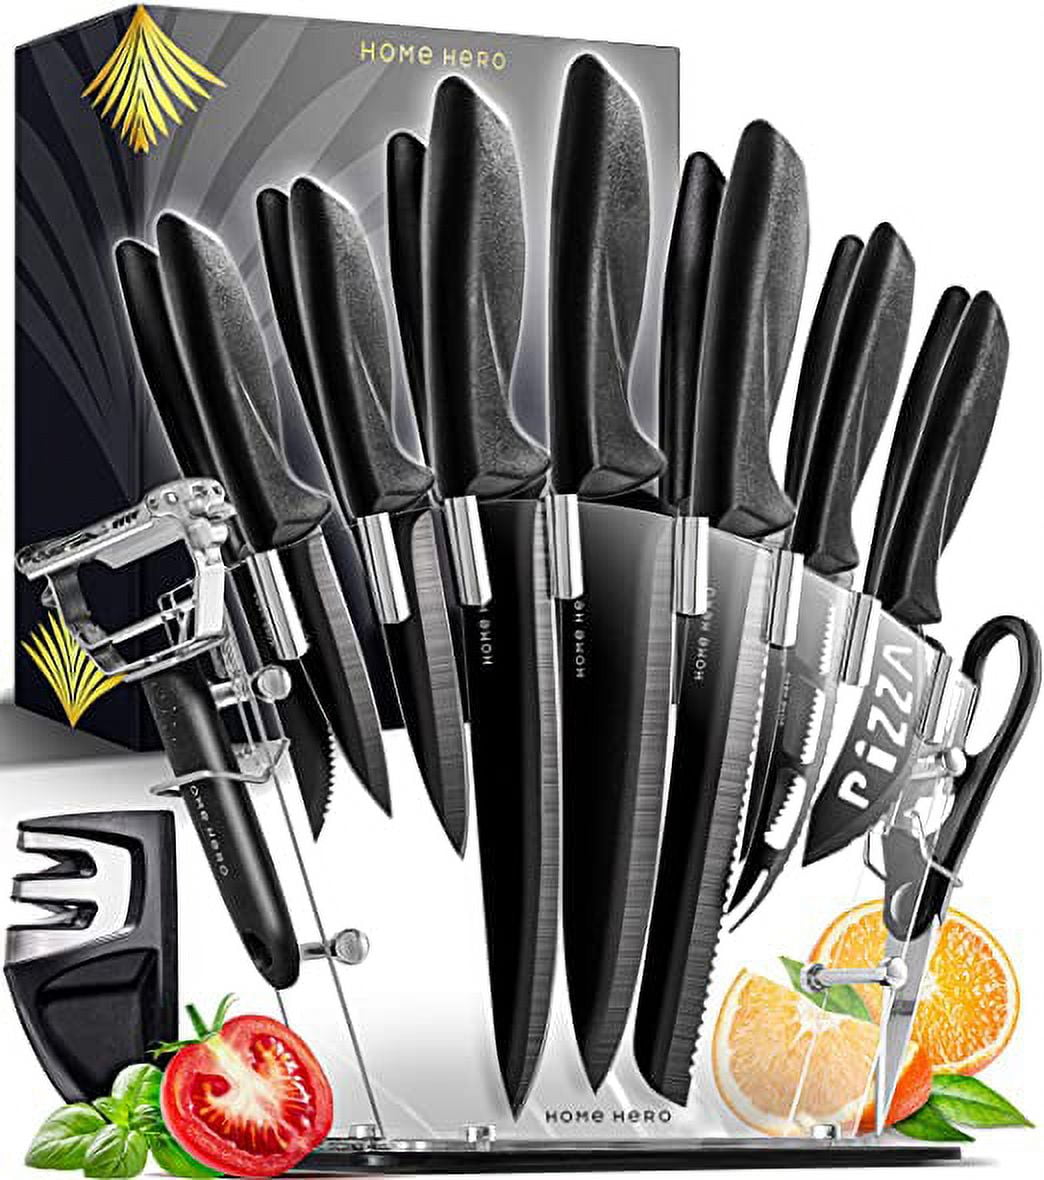  PrinChef Knife Set, 19 Pcs Rust Proof Knives Set for Kitchen,  with Acrylic Stand, Sharpener, Scissors and Peeler, Stainless Steel kitchen knife  set Nonstick and No Scratch: Home & Kitchen